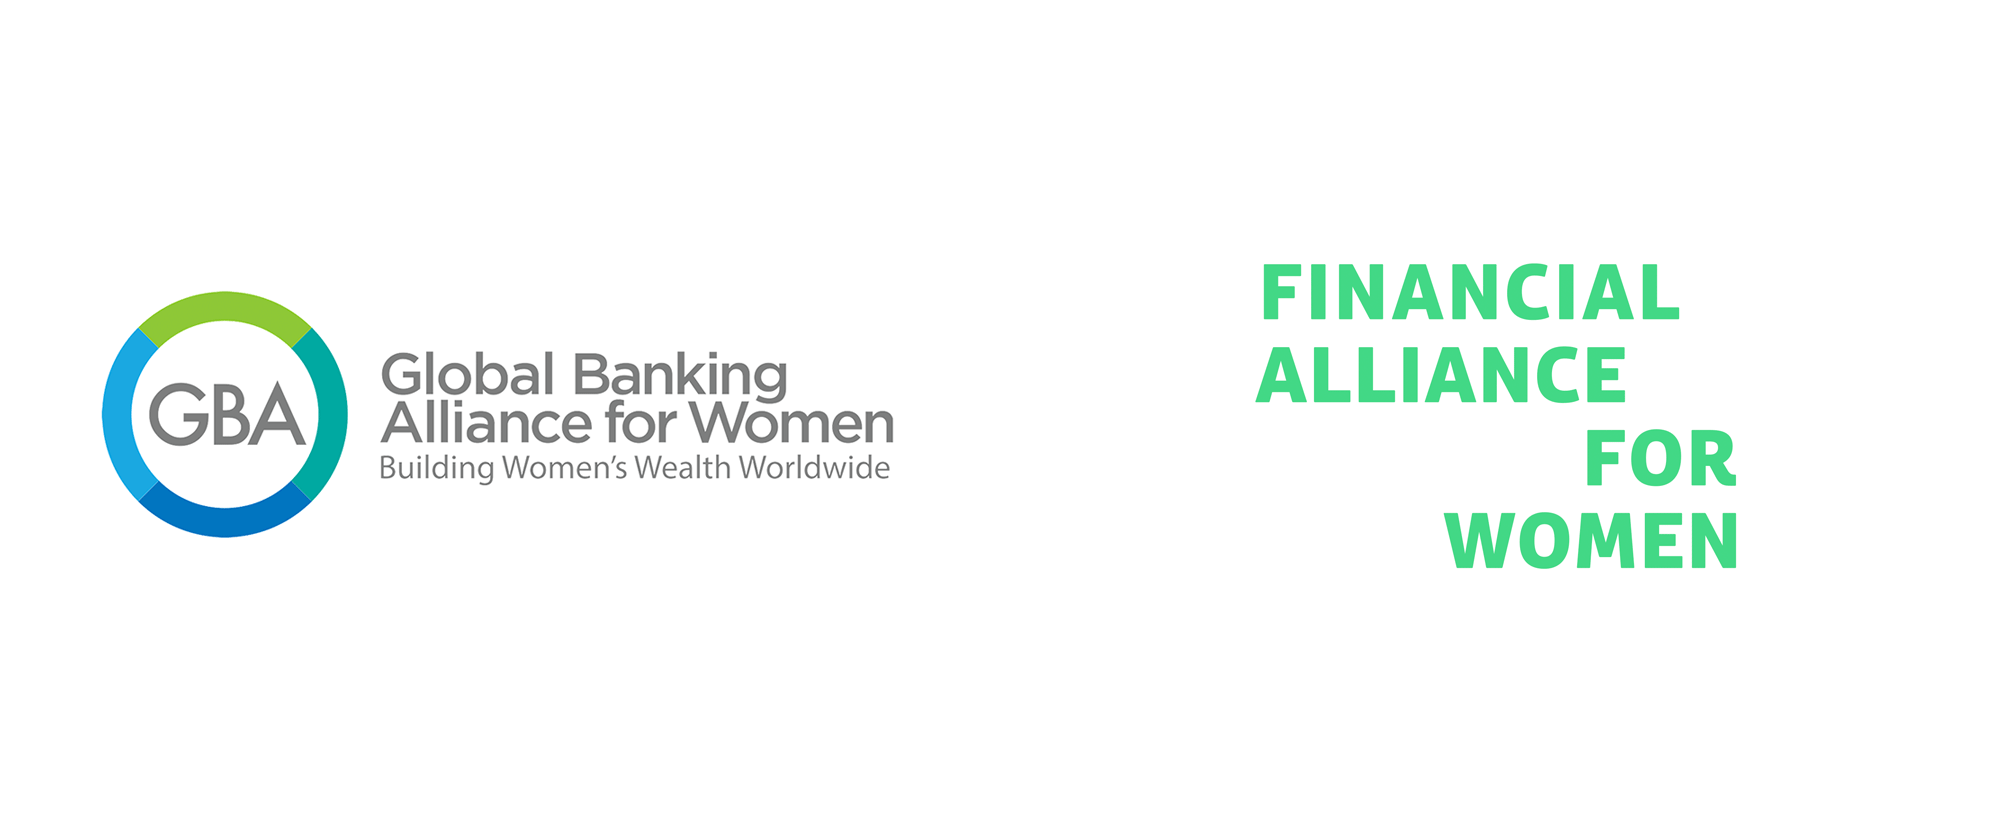 New Logo and Identity for Financial Alliance for Women by Design Bridge